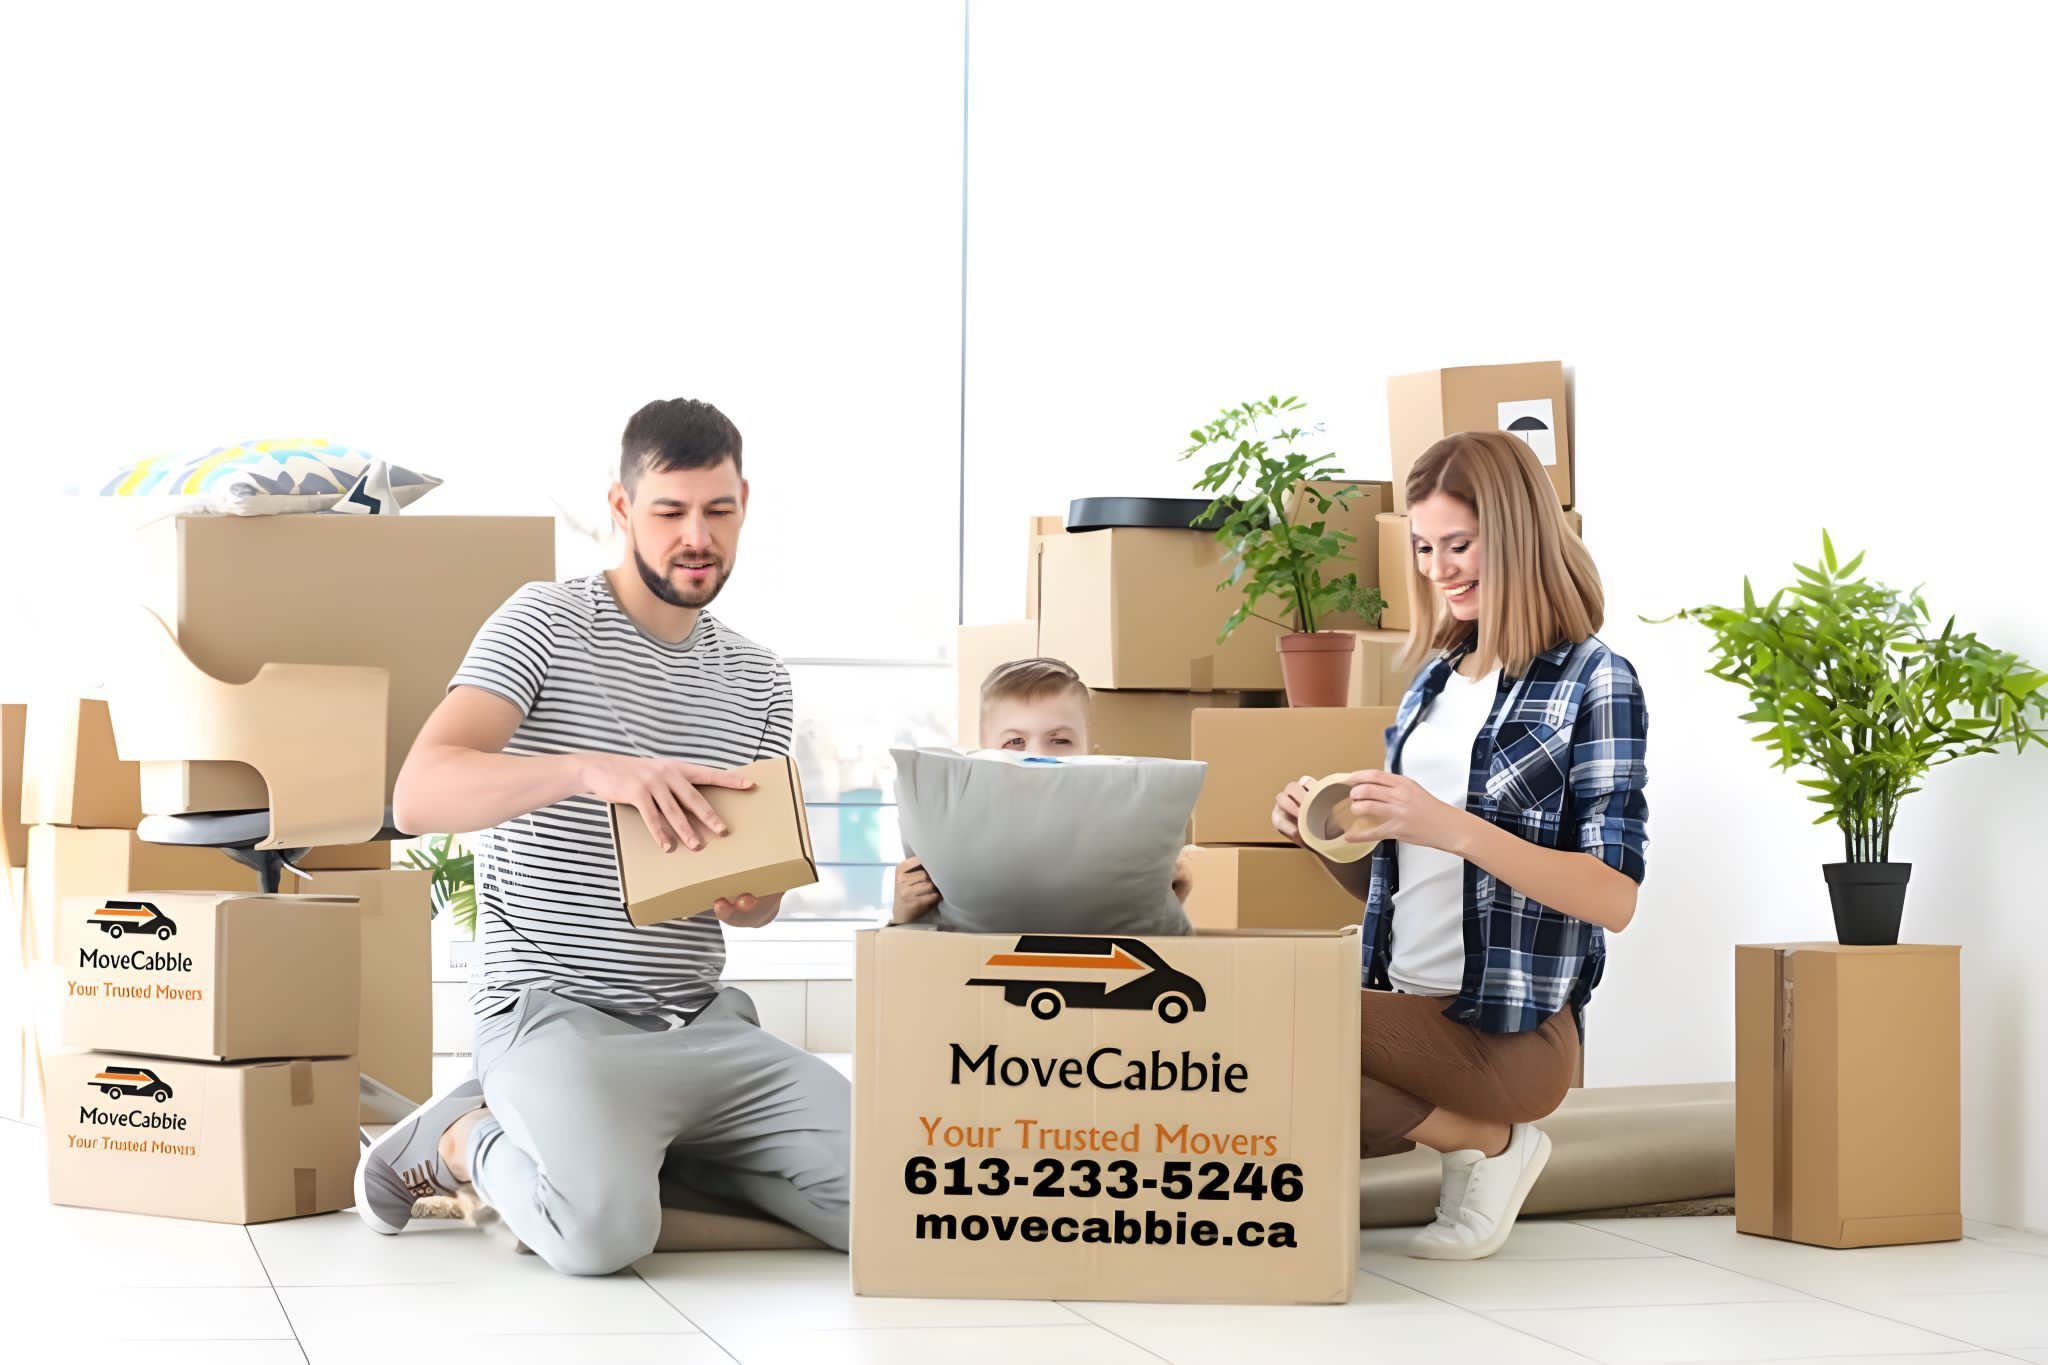 MoveCabbie Trusted Ottawa Movers cover